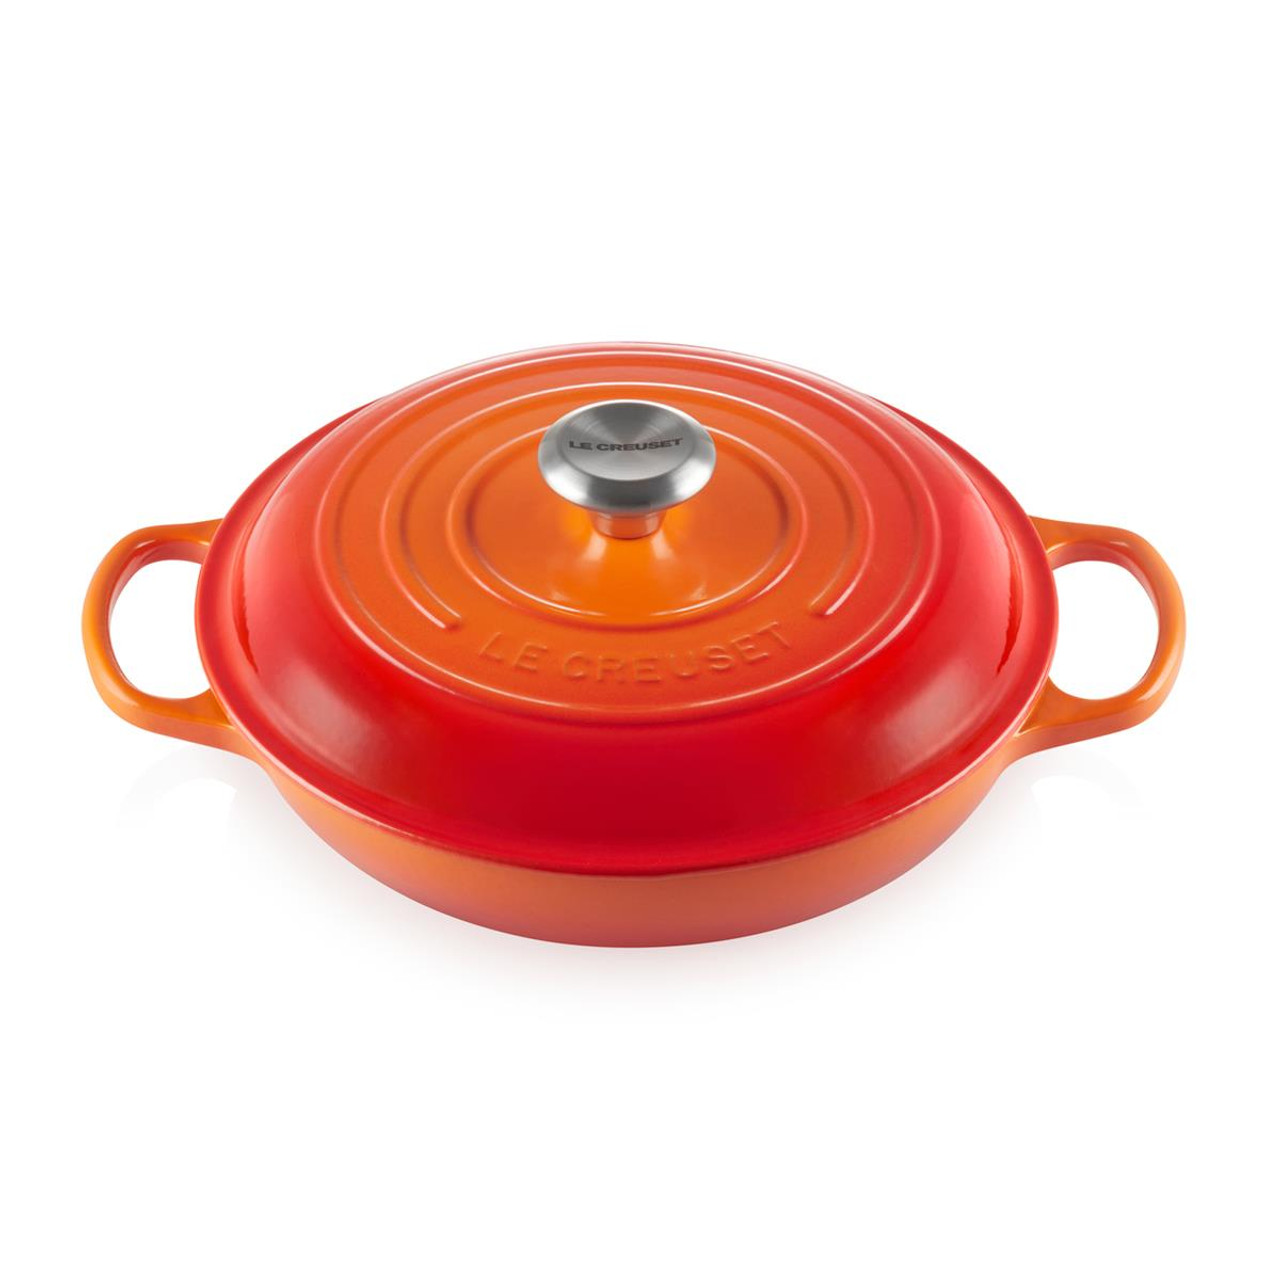 Which heat sources does the Le Creuset 26cm cast iron casserole dish work with?